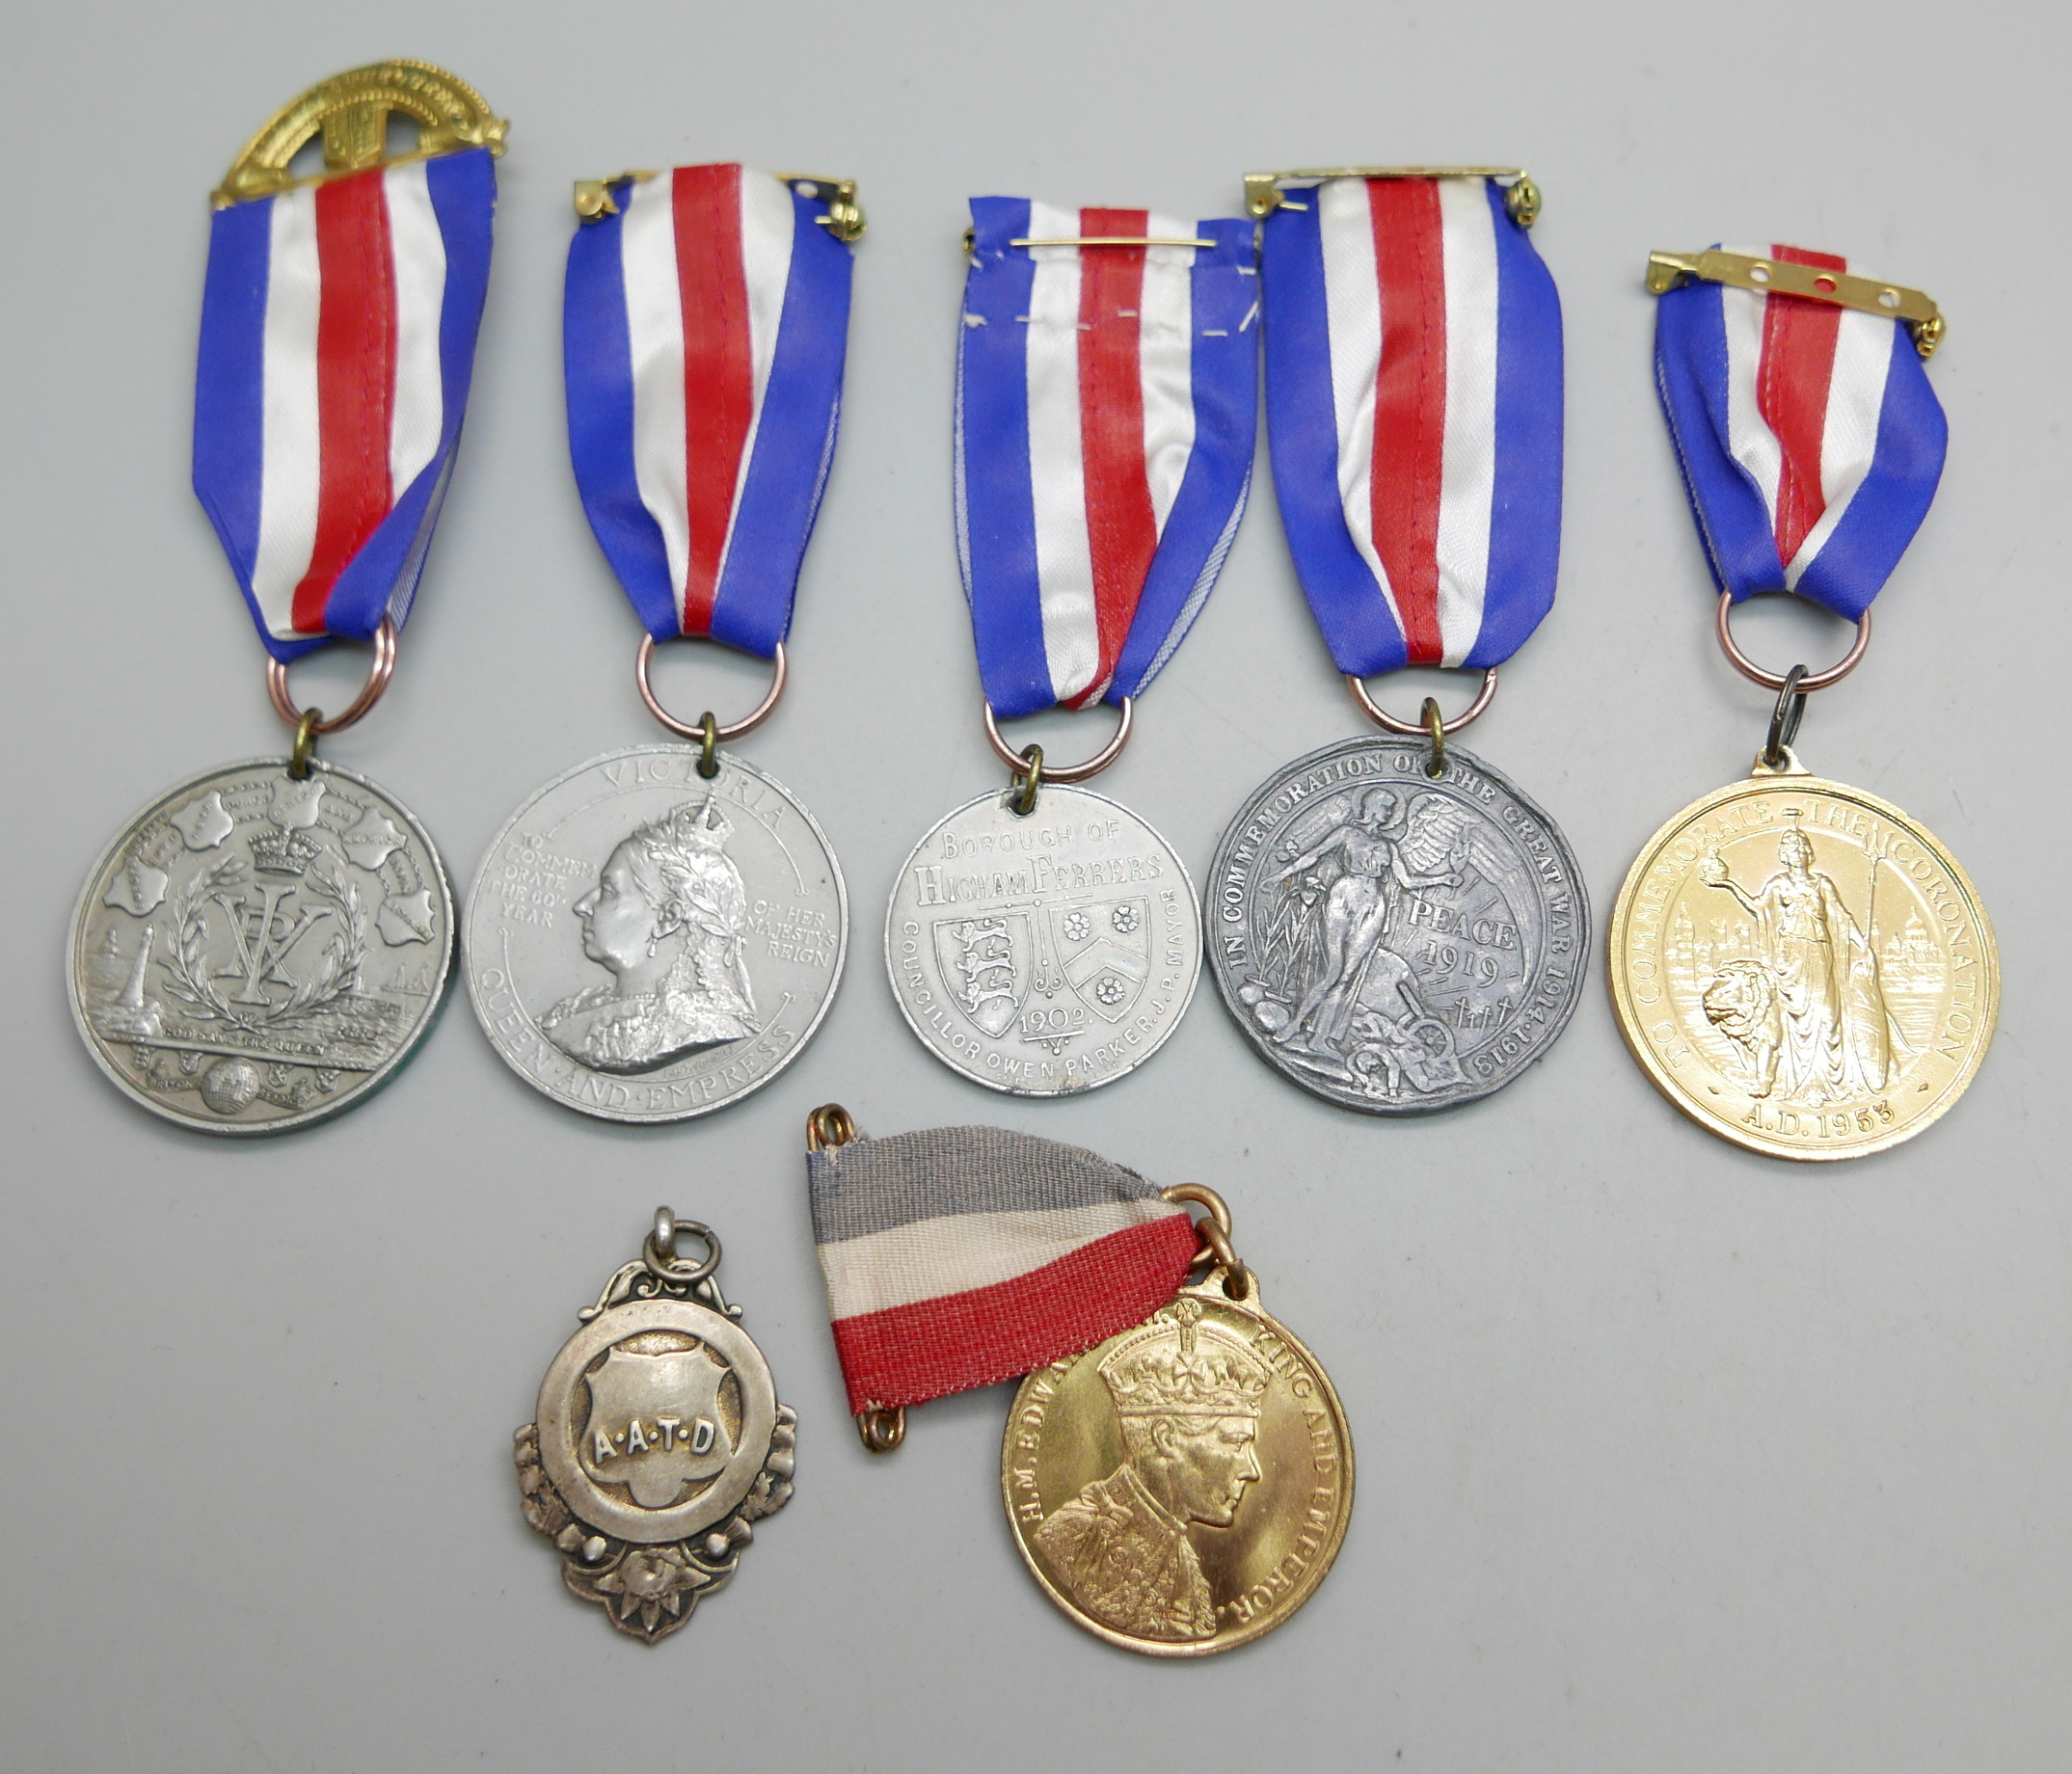 Six early 20th Century commemorative medallions and a silver fob medal